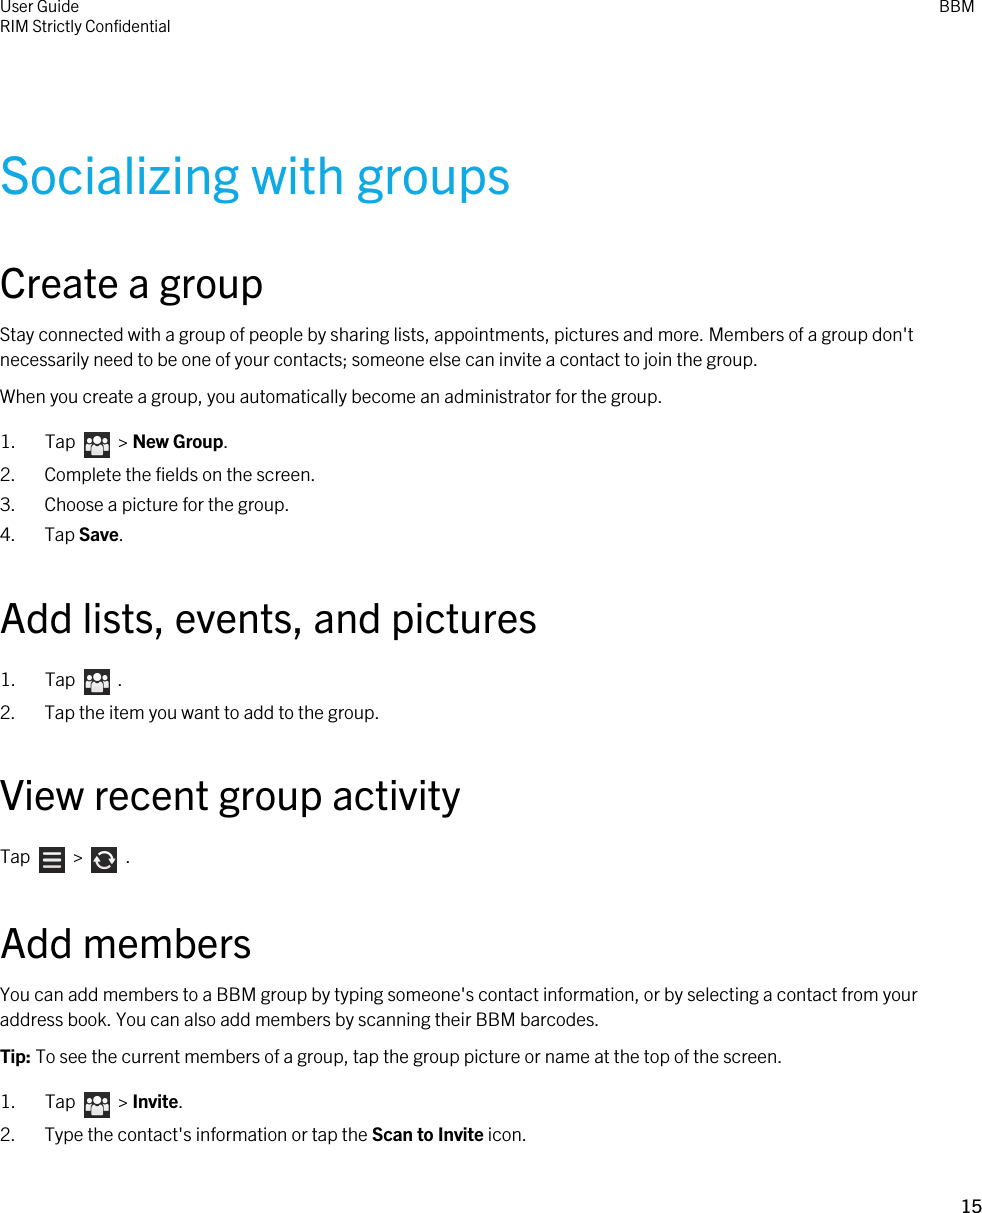 Socializing with groupsCreate a groupStay connected with a group of people by sharing lists, appointments, pictures and more. Members of a group don&apos;t necessarily need to be one of your contacts; someone else can invite a contact to join the group.When you create a group, you automatically become an administrator for the group.1.  Tap    &gt; New Group.2. Complete the fields on the screen.3. Choose a picture for the group.4. Tap Save.Add lists, events, and pictures1.  Tap    .2. Tap the item you want to add to the group.View recent group activityTap    &gt;    .Add membersYou can add members to a BBM group by typing someone&apos;s contact information, or by selecting a contact from your address book. You can also add members by scanning their BBM barcodes.Tip: To see the current members of a group, tap the group picture or name at the top of the screen.1.  Tap    &gt; Invite.2. Type the contact&apos;s information or tap the Scan to Invite icon.User GuideRIM Strictly ConfidentialBBM15 